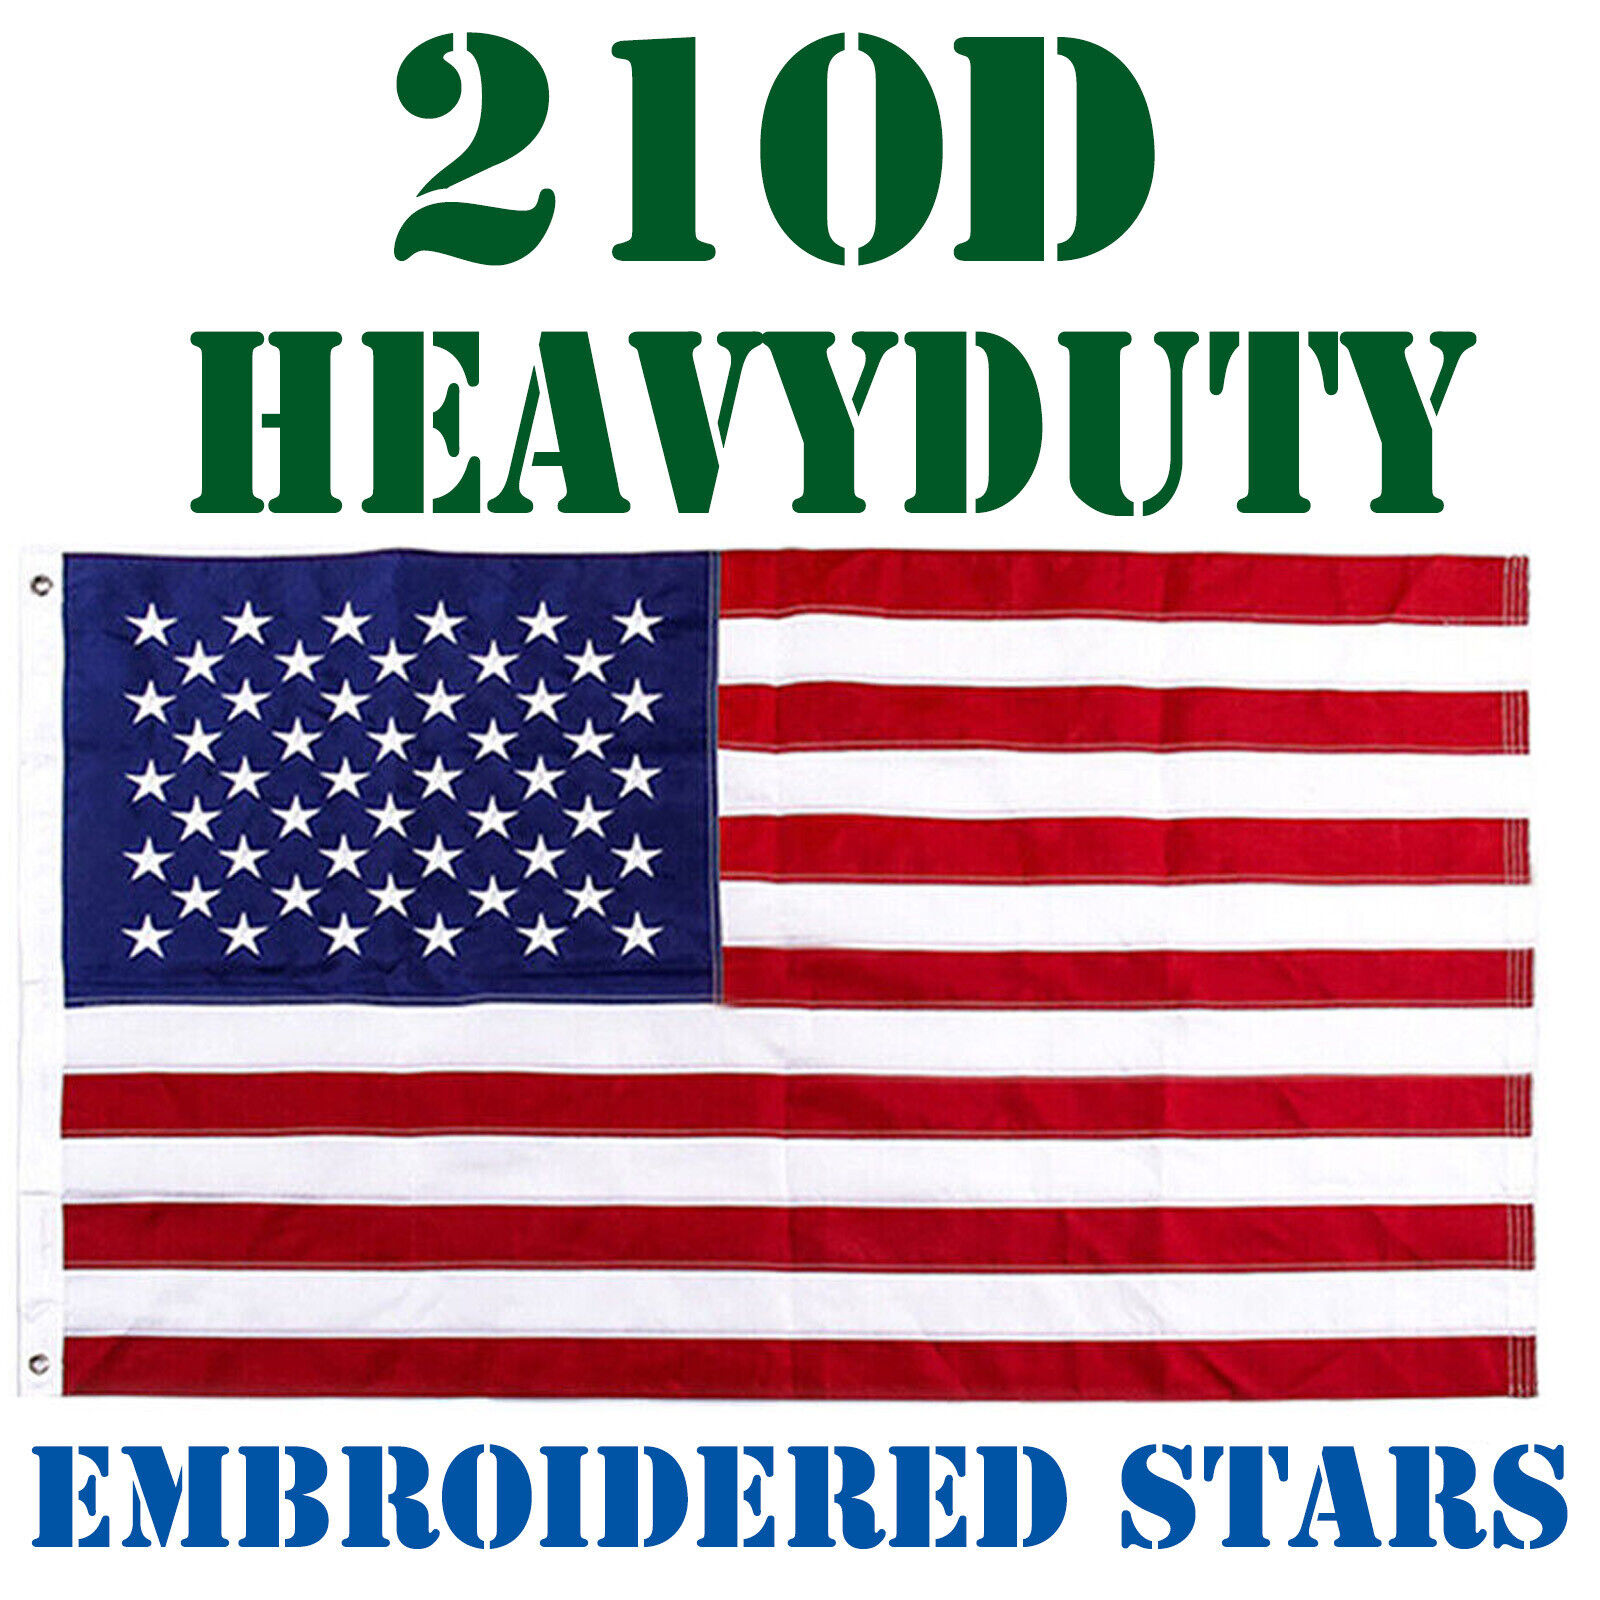 3'x5' US American Flag Heavy Duty Embroidered Stars Sewn Stripes Grommets Oxford